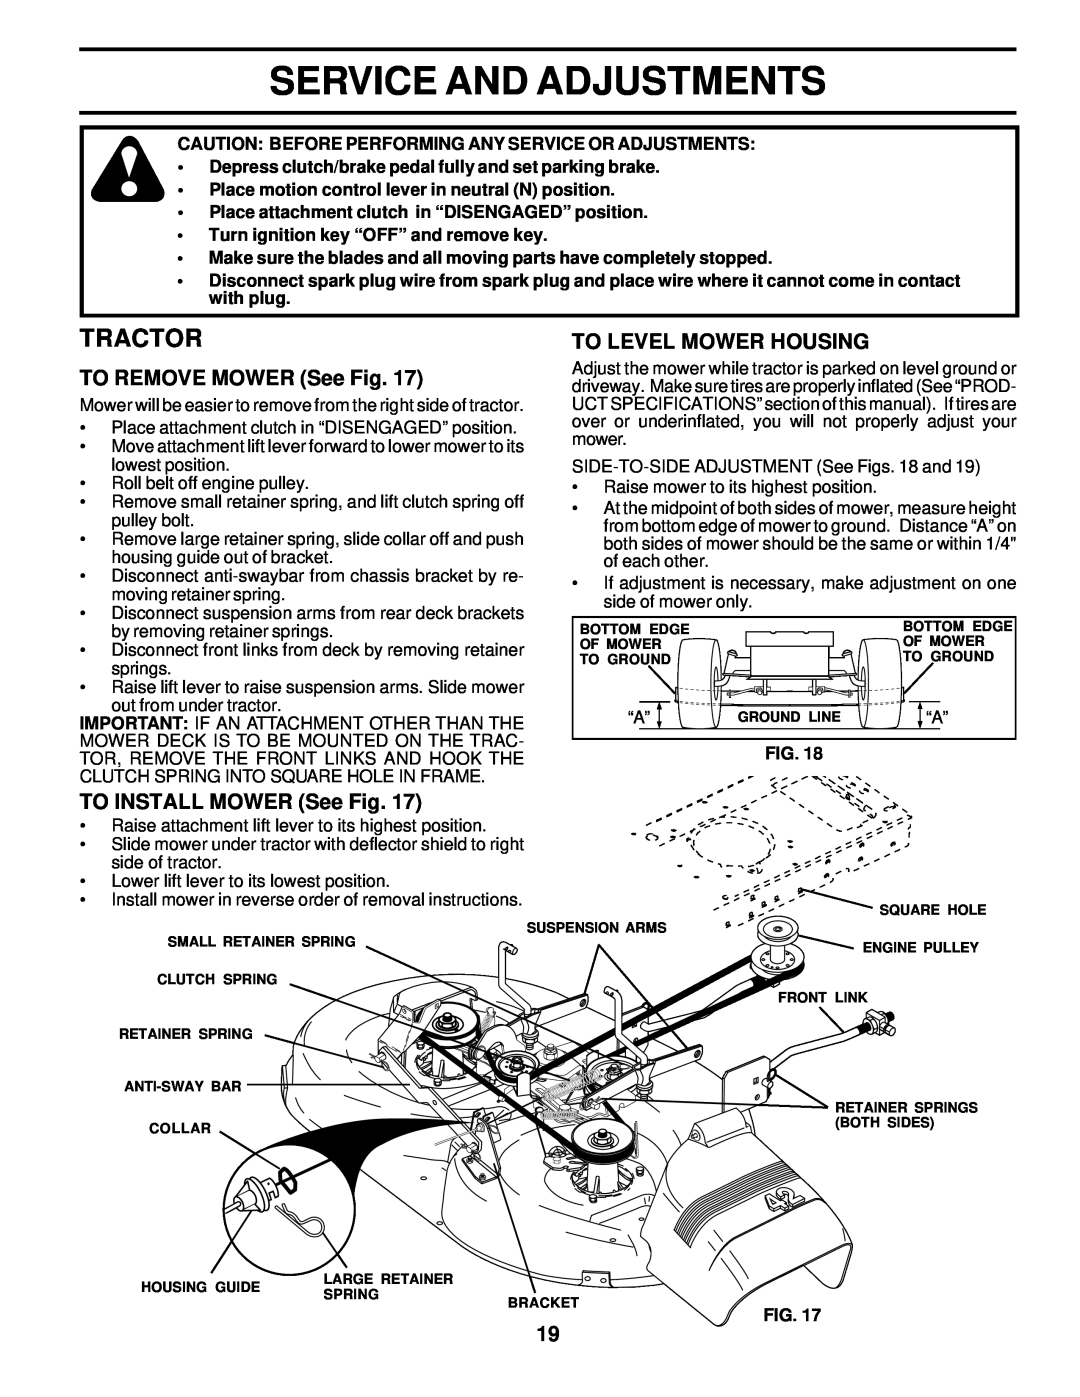 Poulan PO165H42A Service And Adjustments, TO REMOVE MOWER See Fig, To Level Mower Housing, TO INSTALL MOWER See Fig 